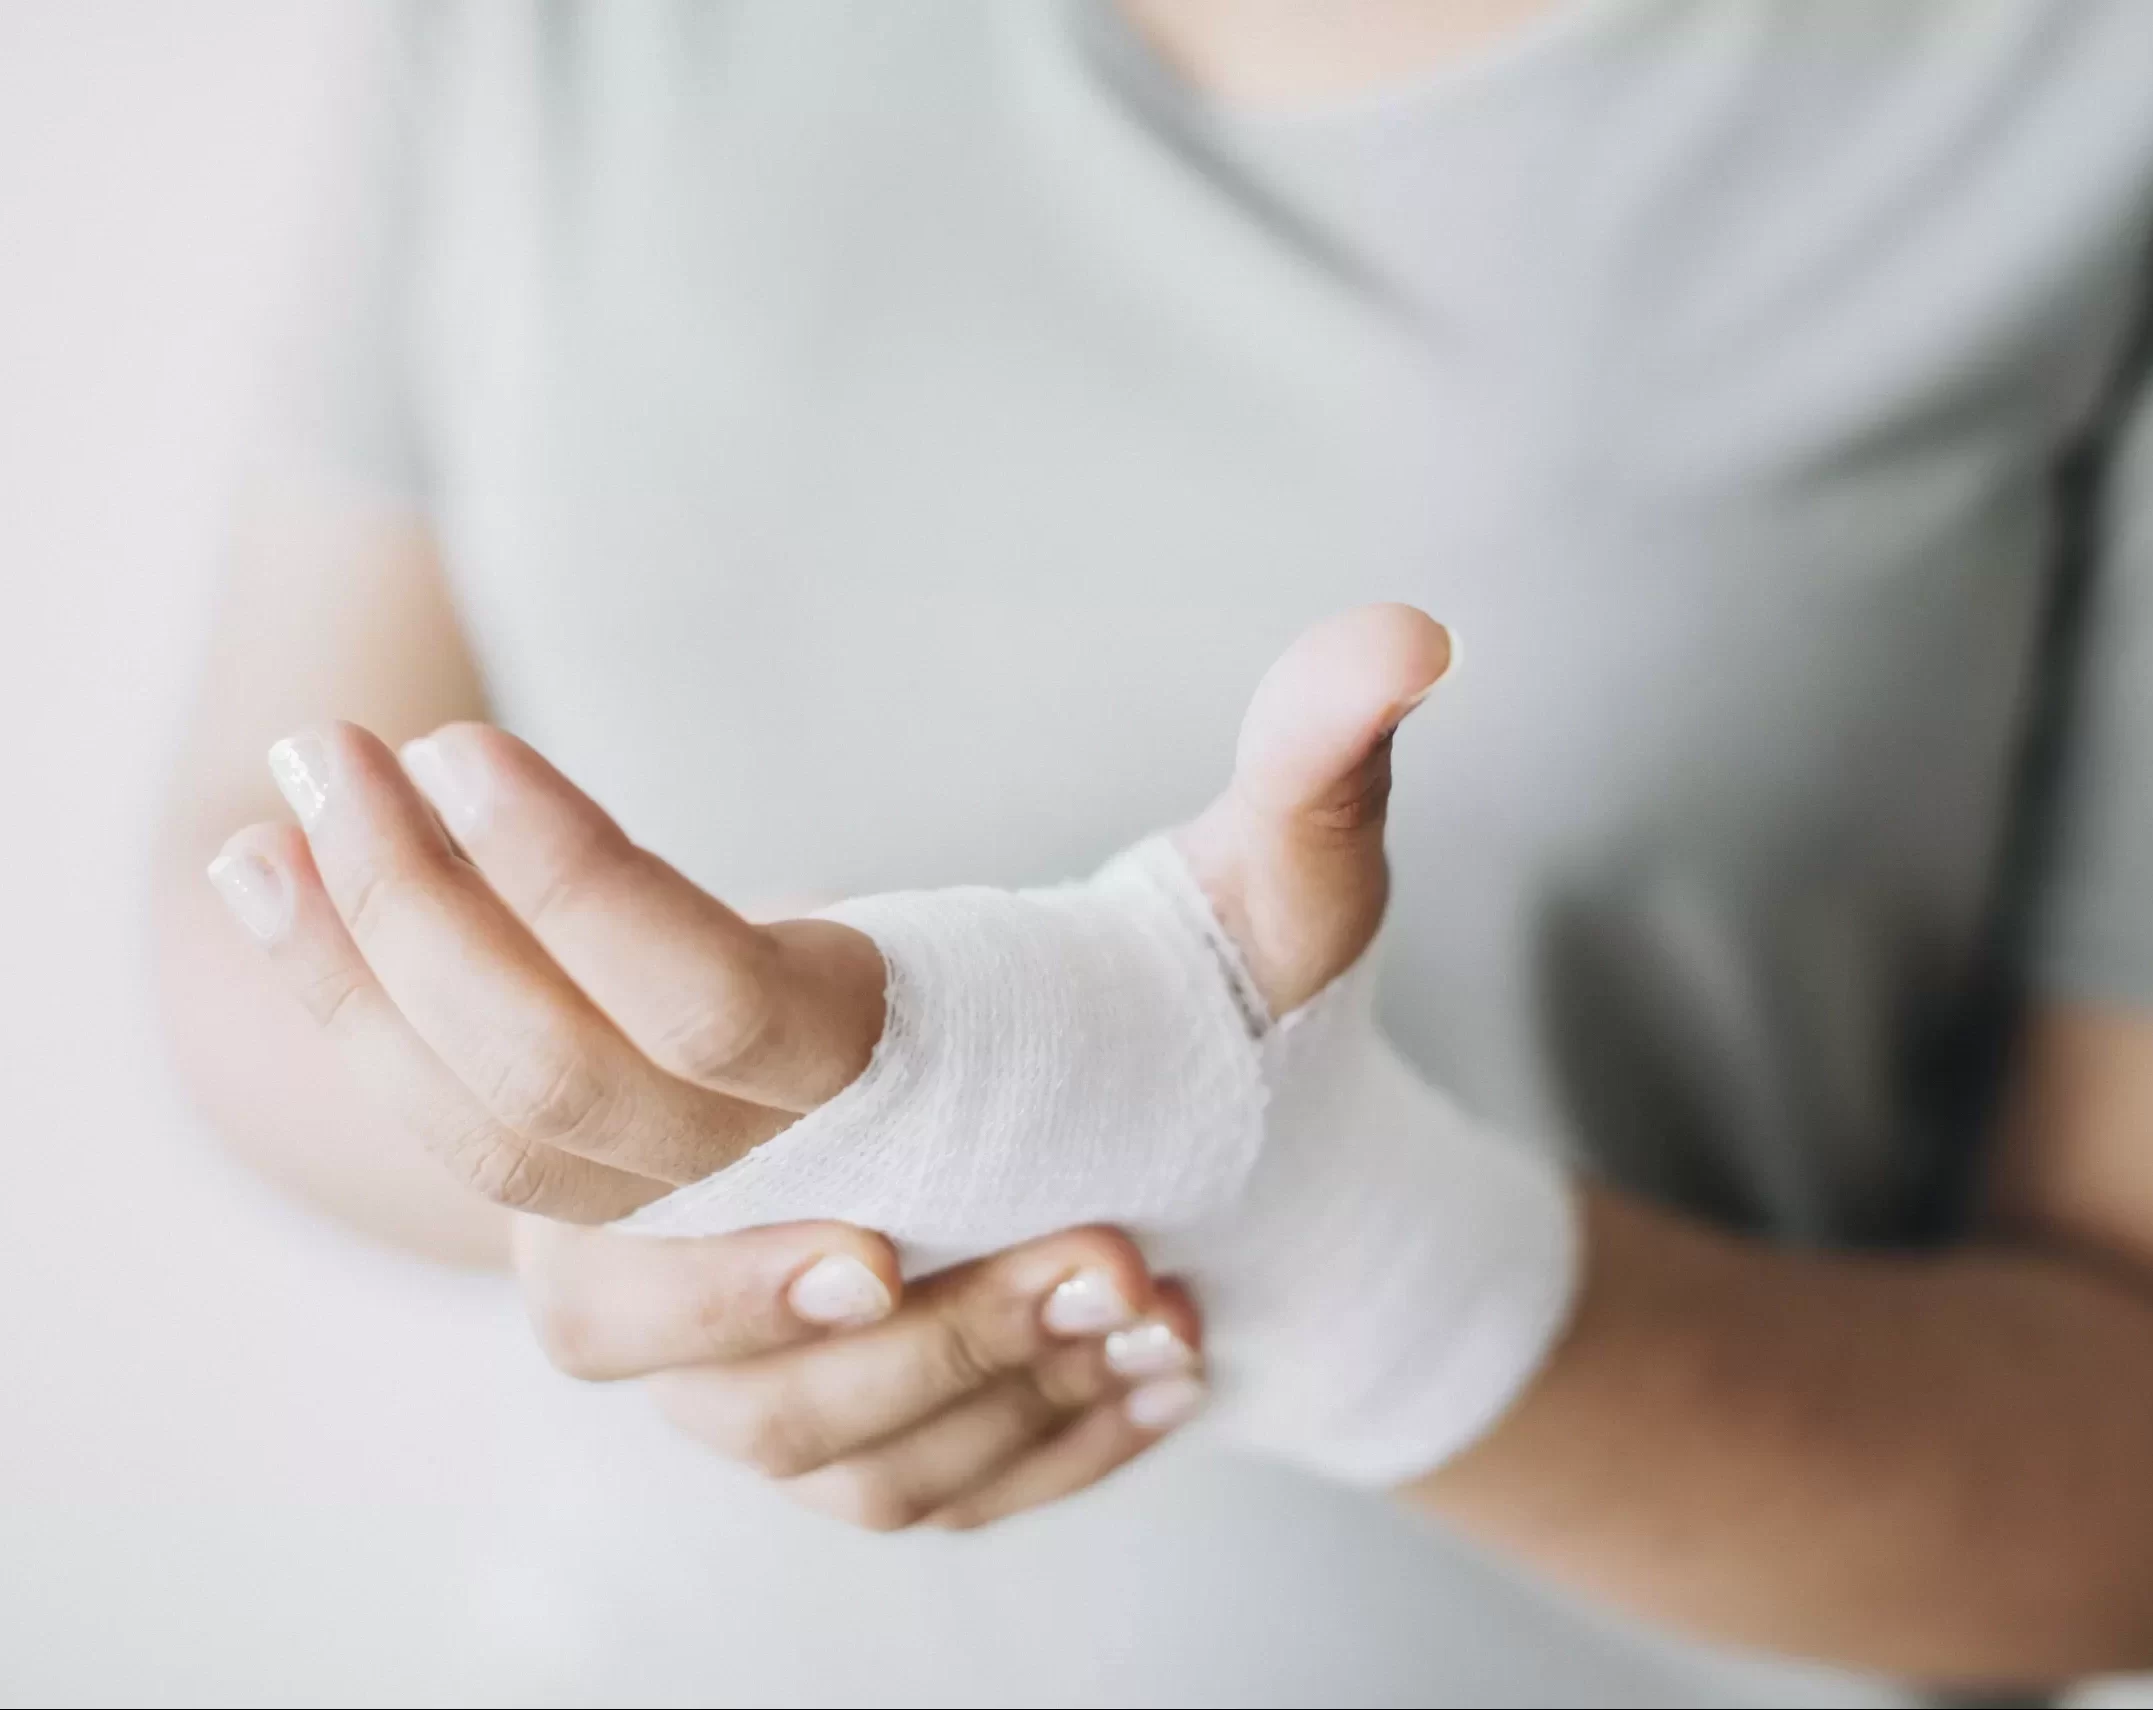 AnyConv.com__woman-with-gauze-bandage-wrapped-around-her-hand